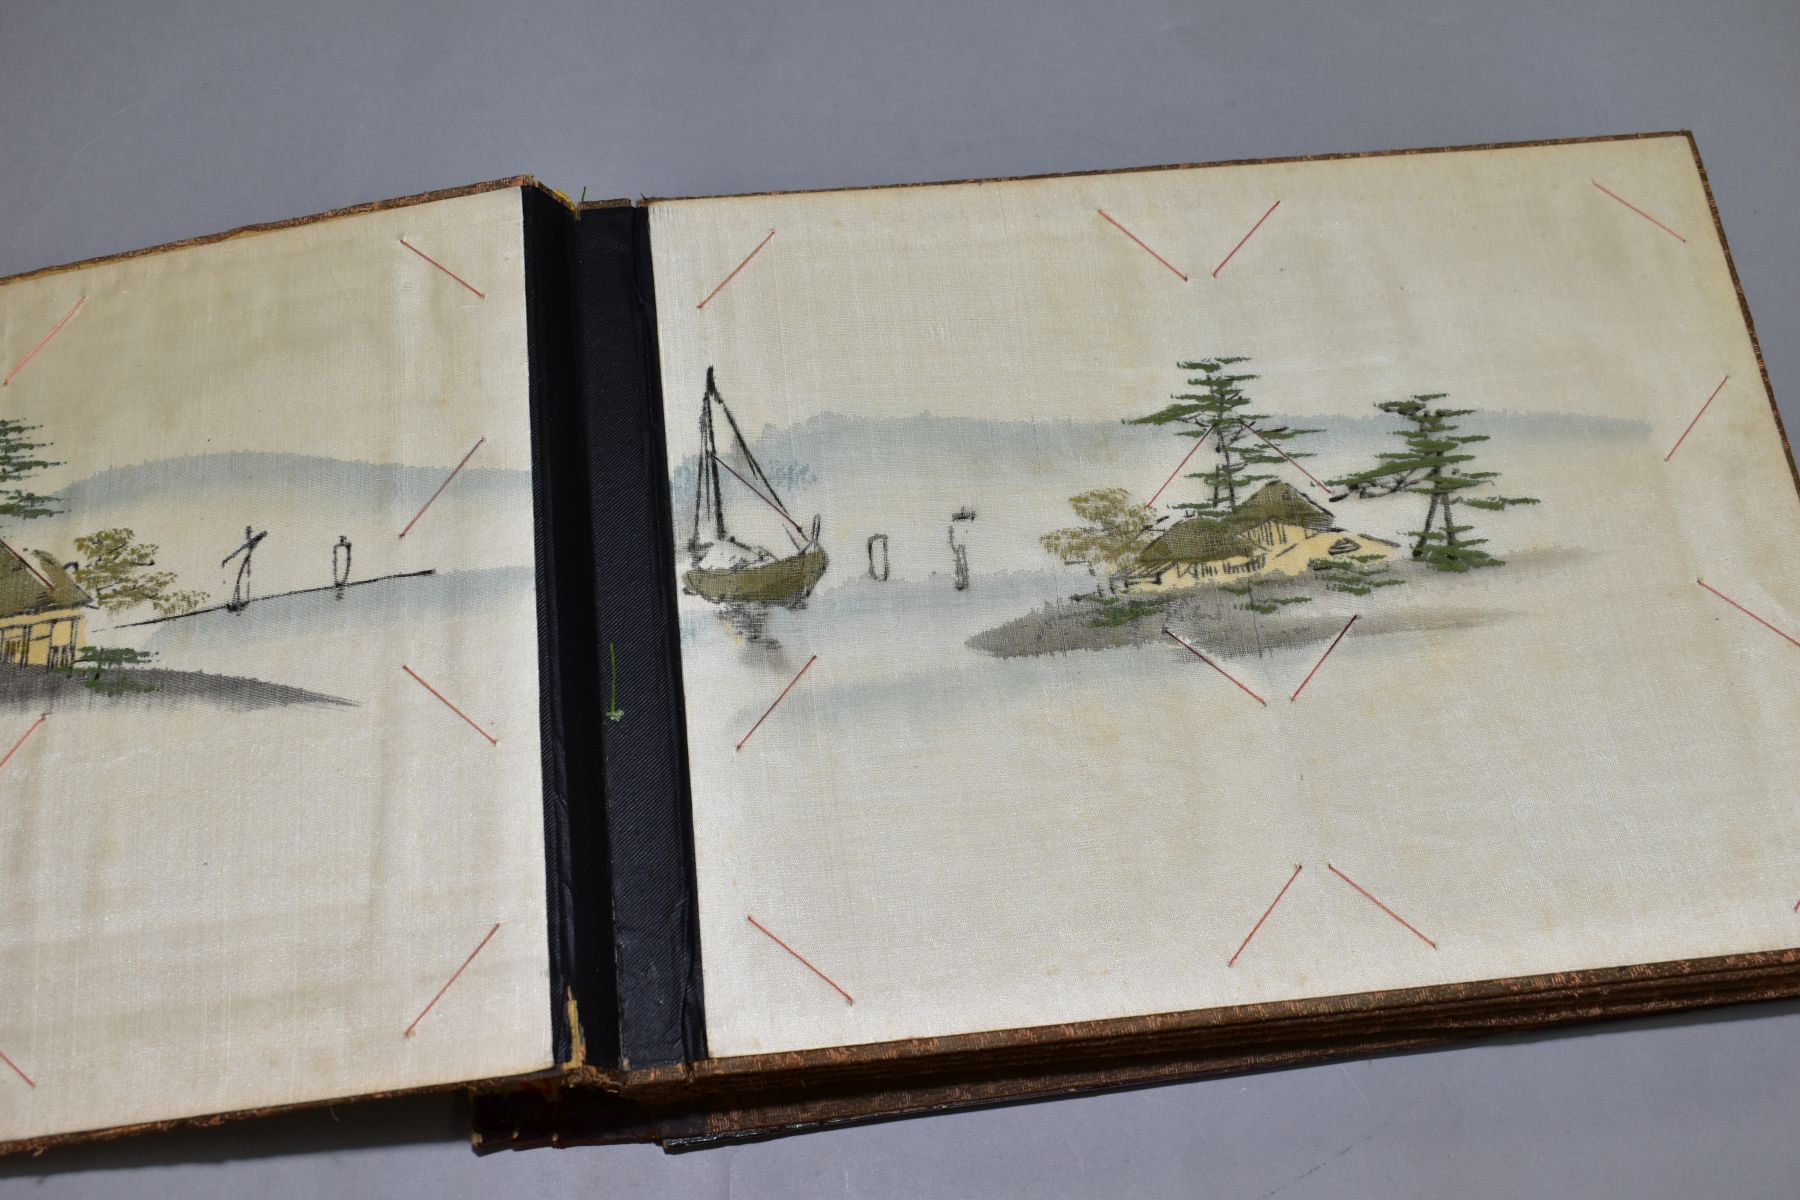 A SHIBYAMA LAQUERED PHOTOGRAPH/POSTCARD ALBUM, containing 20 leaves of painted silk illustrations, - Image 4 of 8